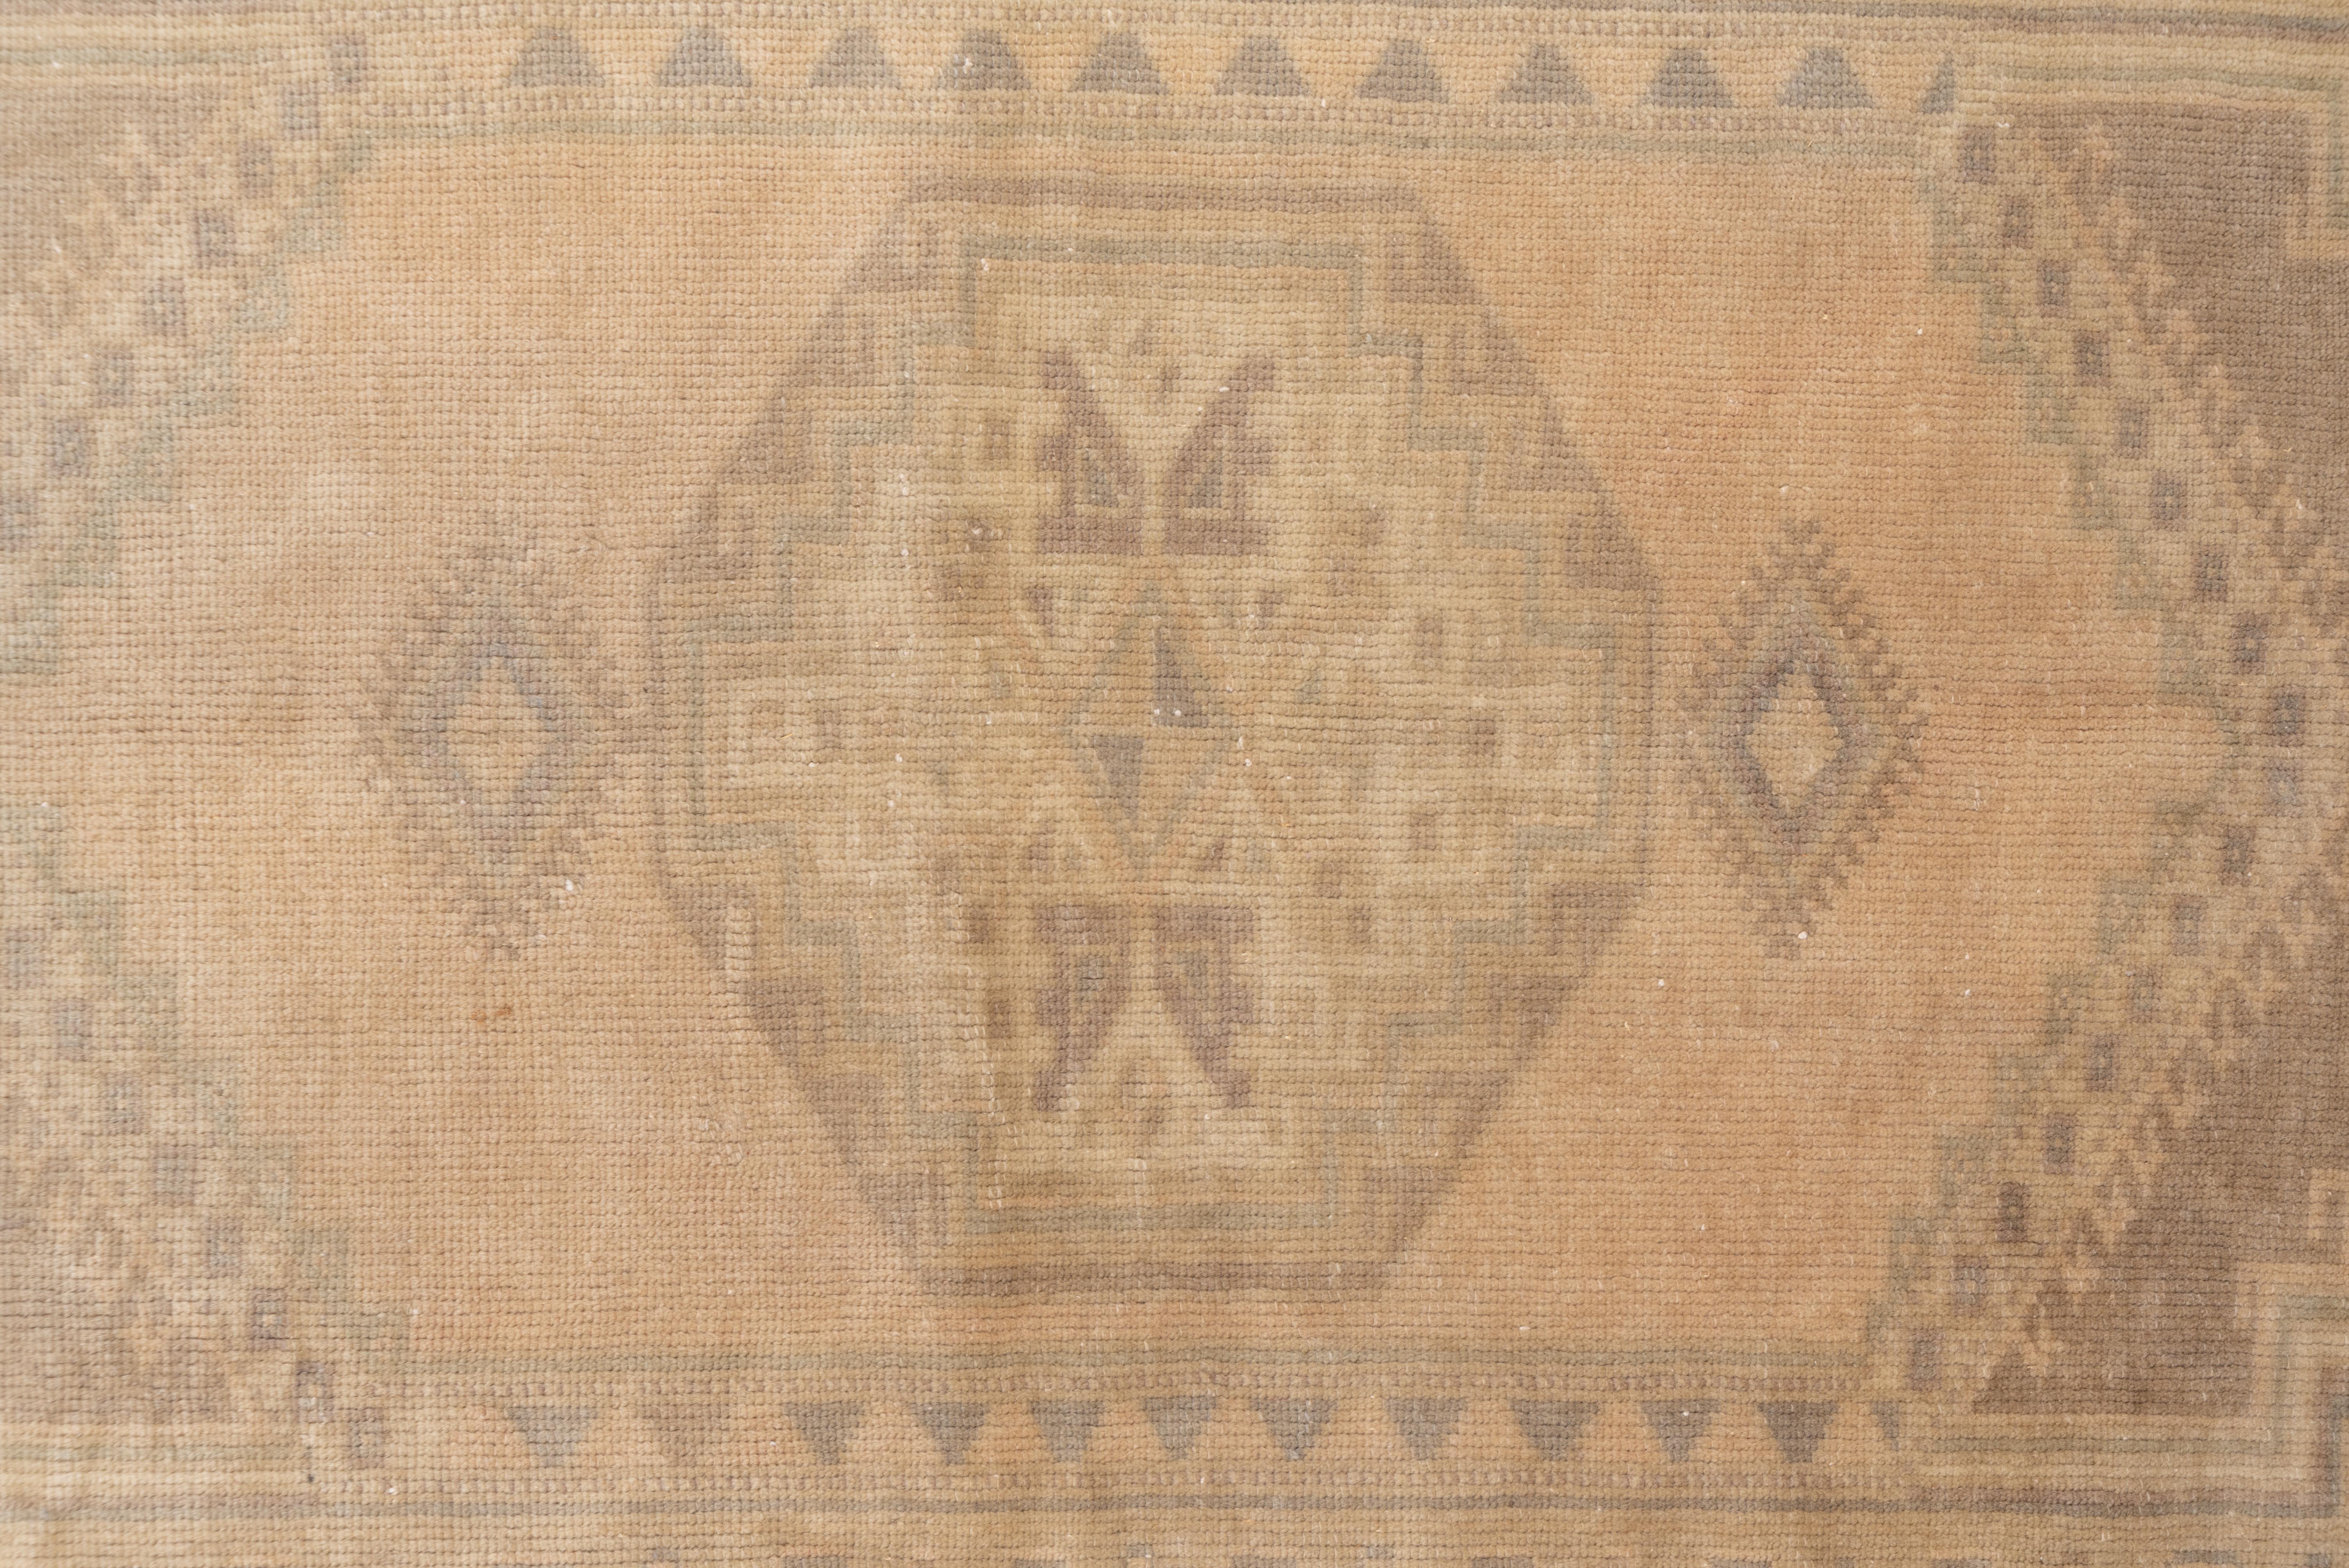 Mid-20th Century Turkish Oushak in Washed Over Faded Pink Khaki Accents - Centre Medallion Rug For Sale